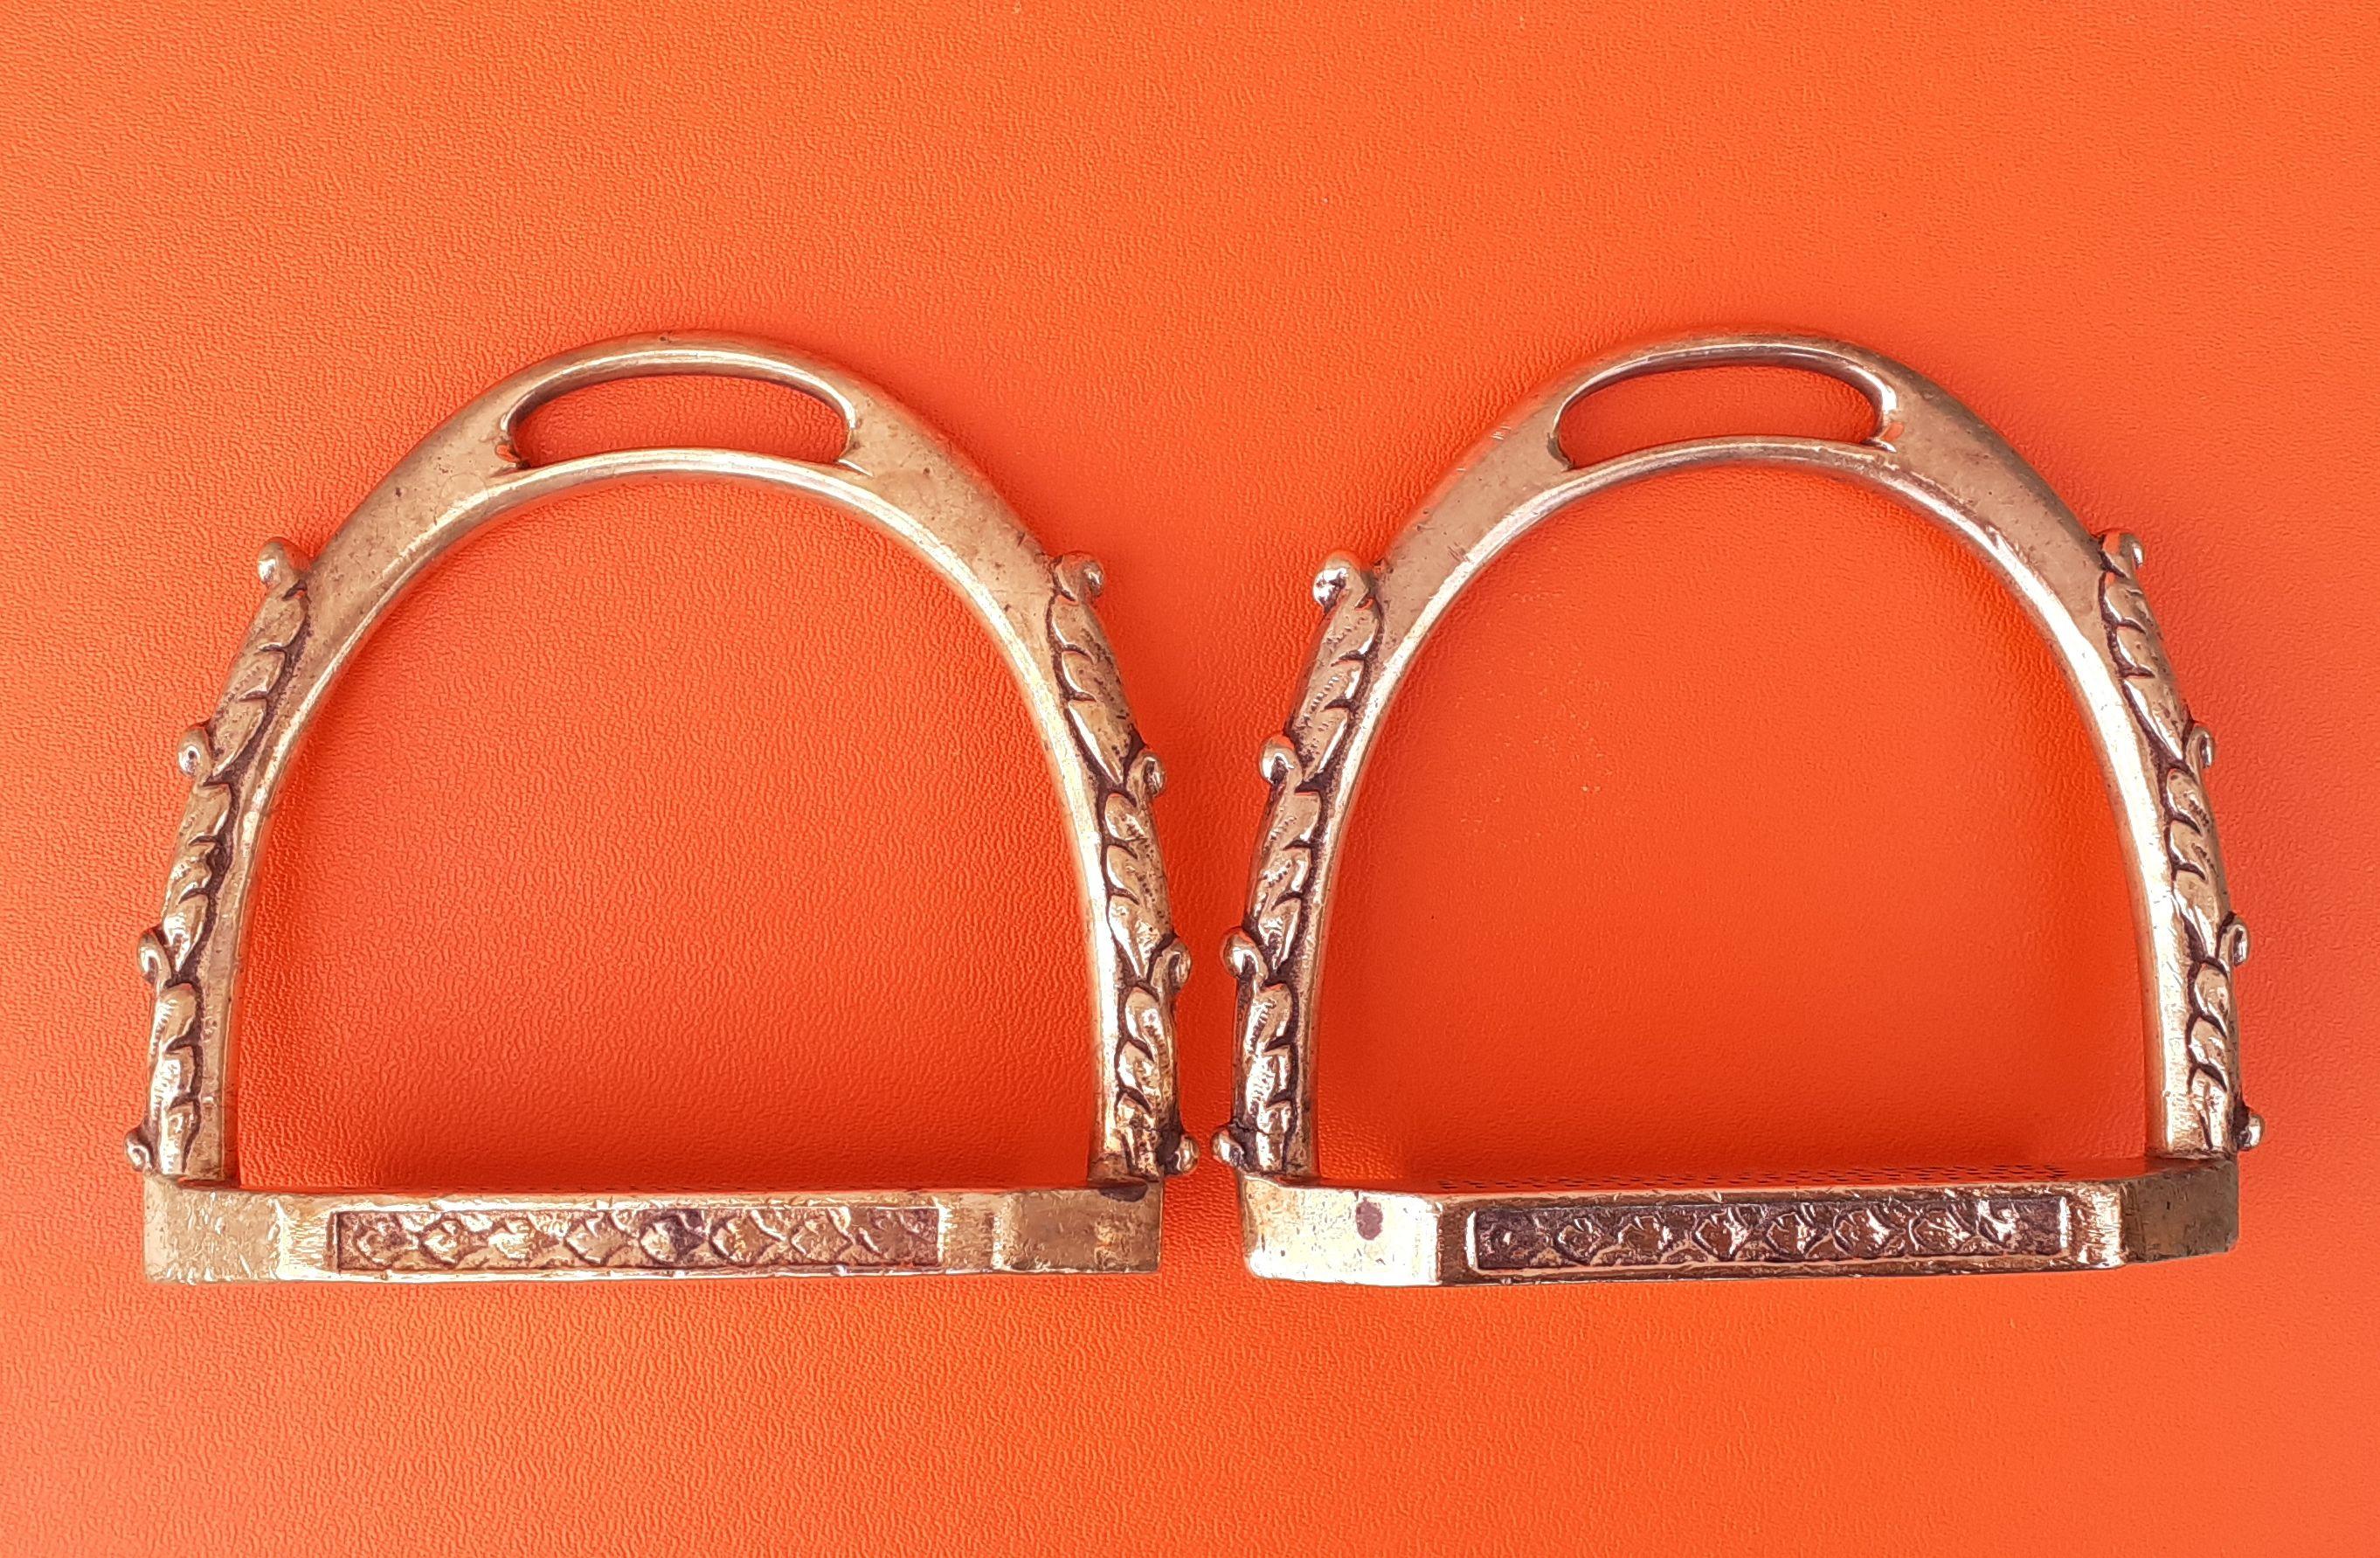 Exceptional Hermès Pair of Chiseled Bronze Stirrups Horse Ridding Texas For Sale 4